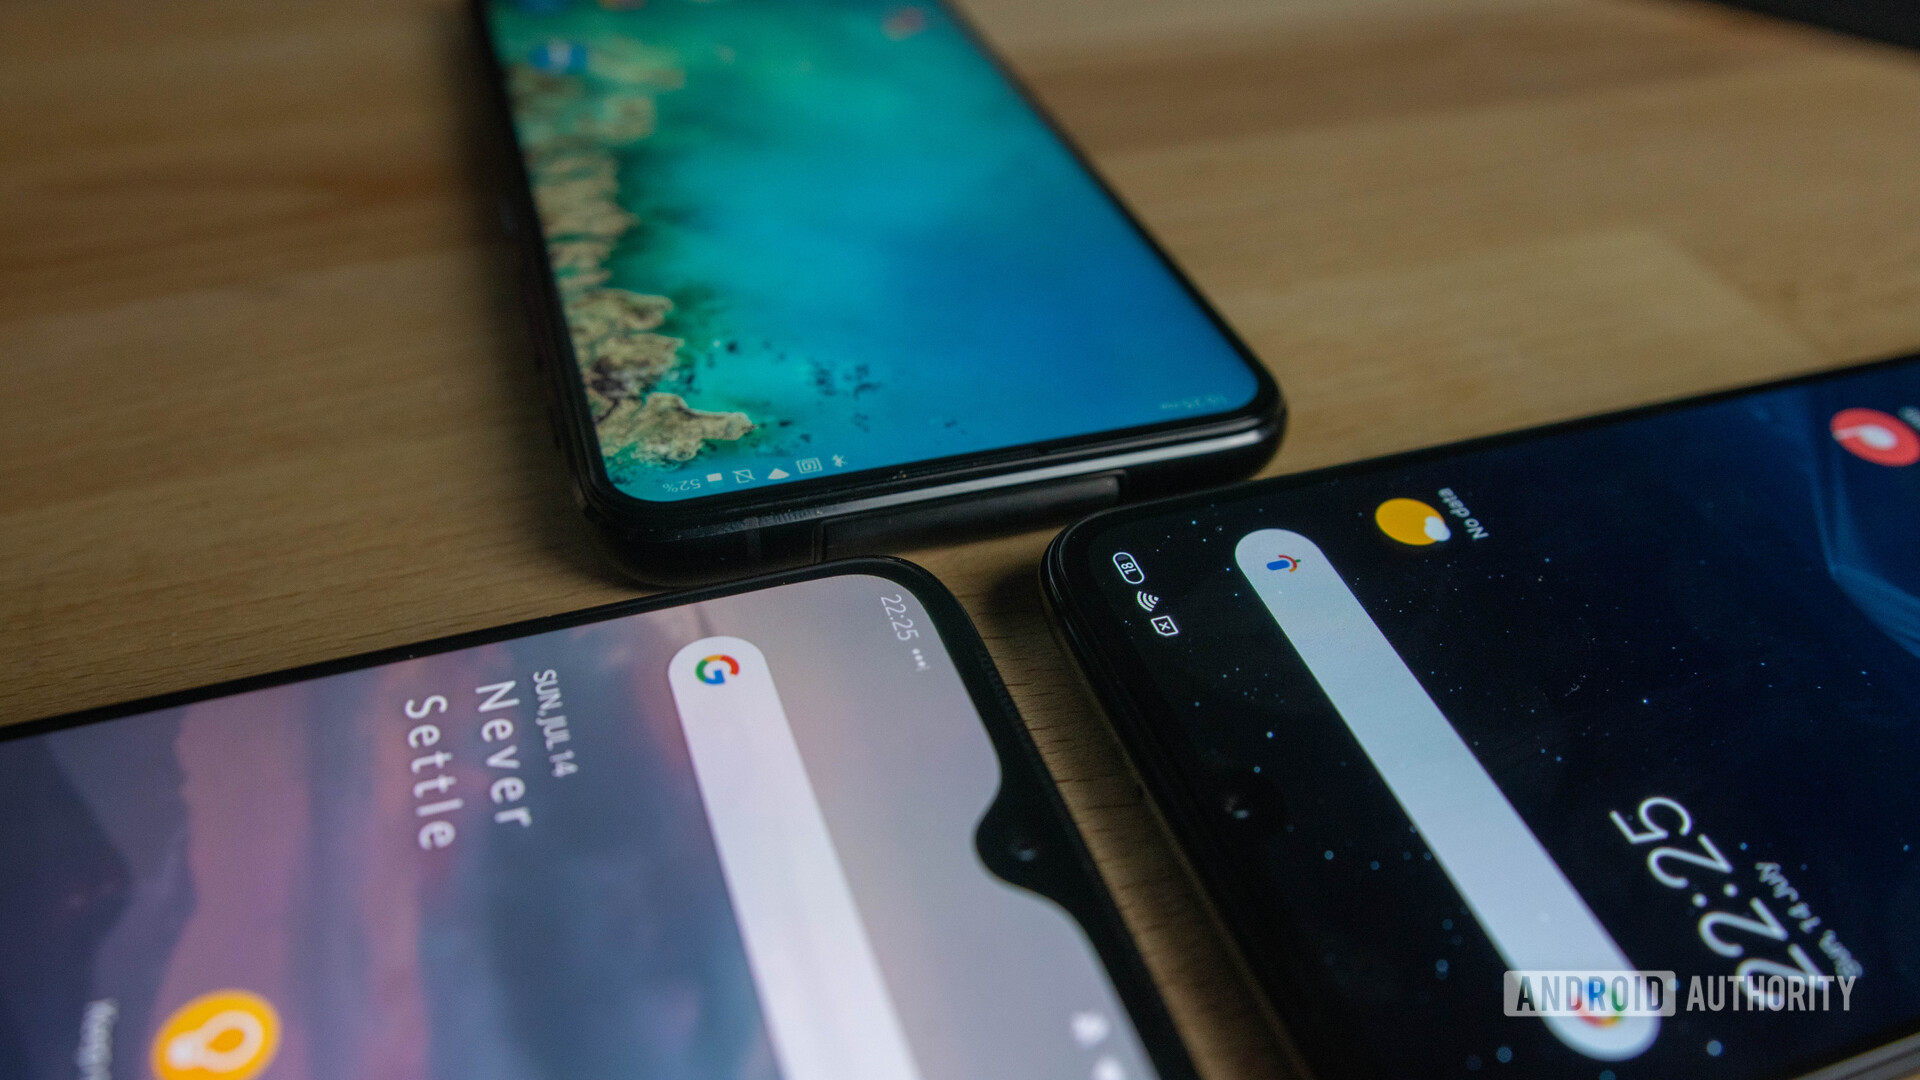 OnePlus 7 and Xiaomi Mi 9 and Asus Zenfone 6 trio with focus on the displays